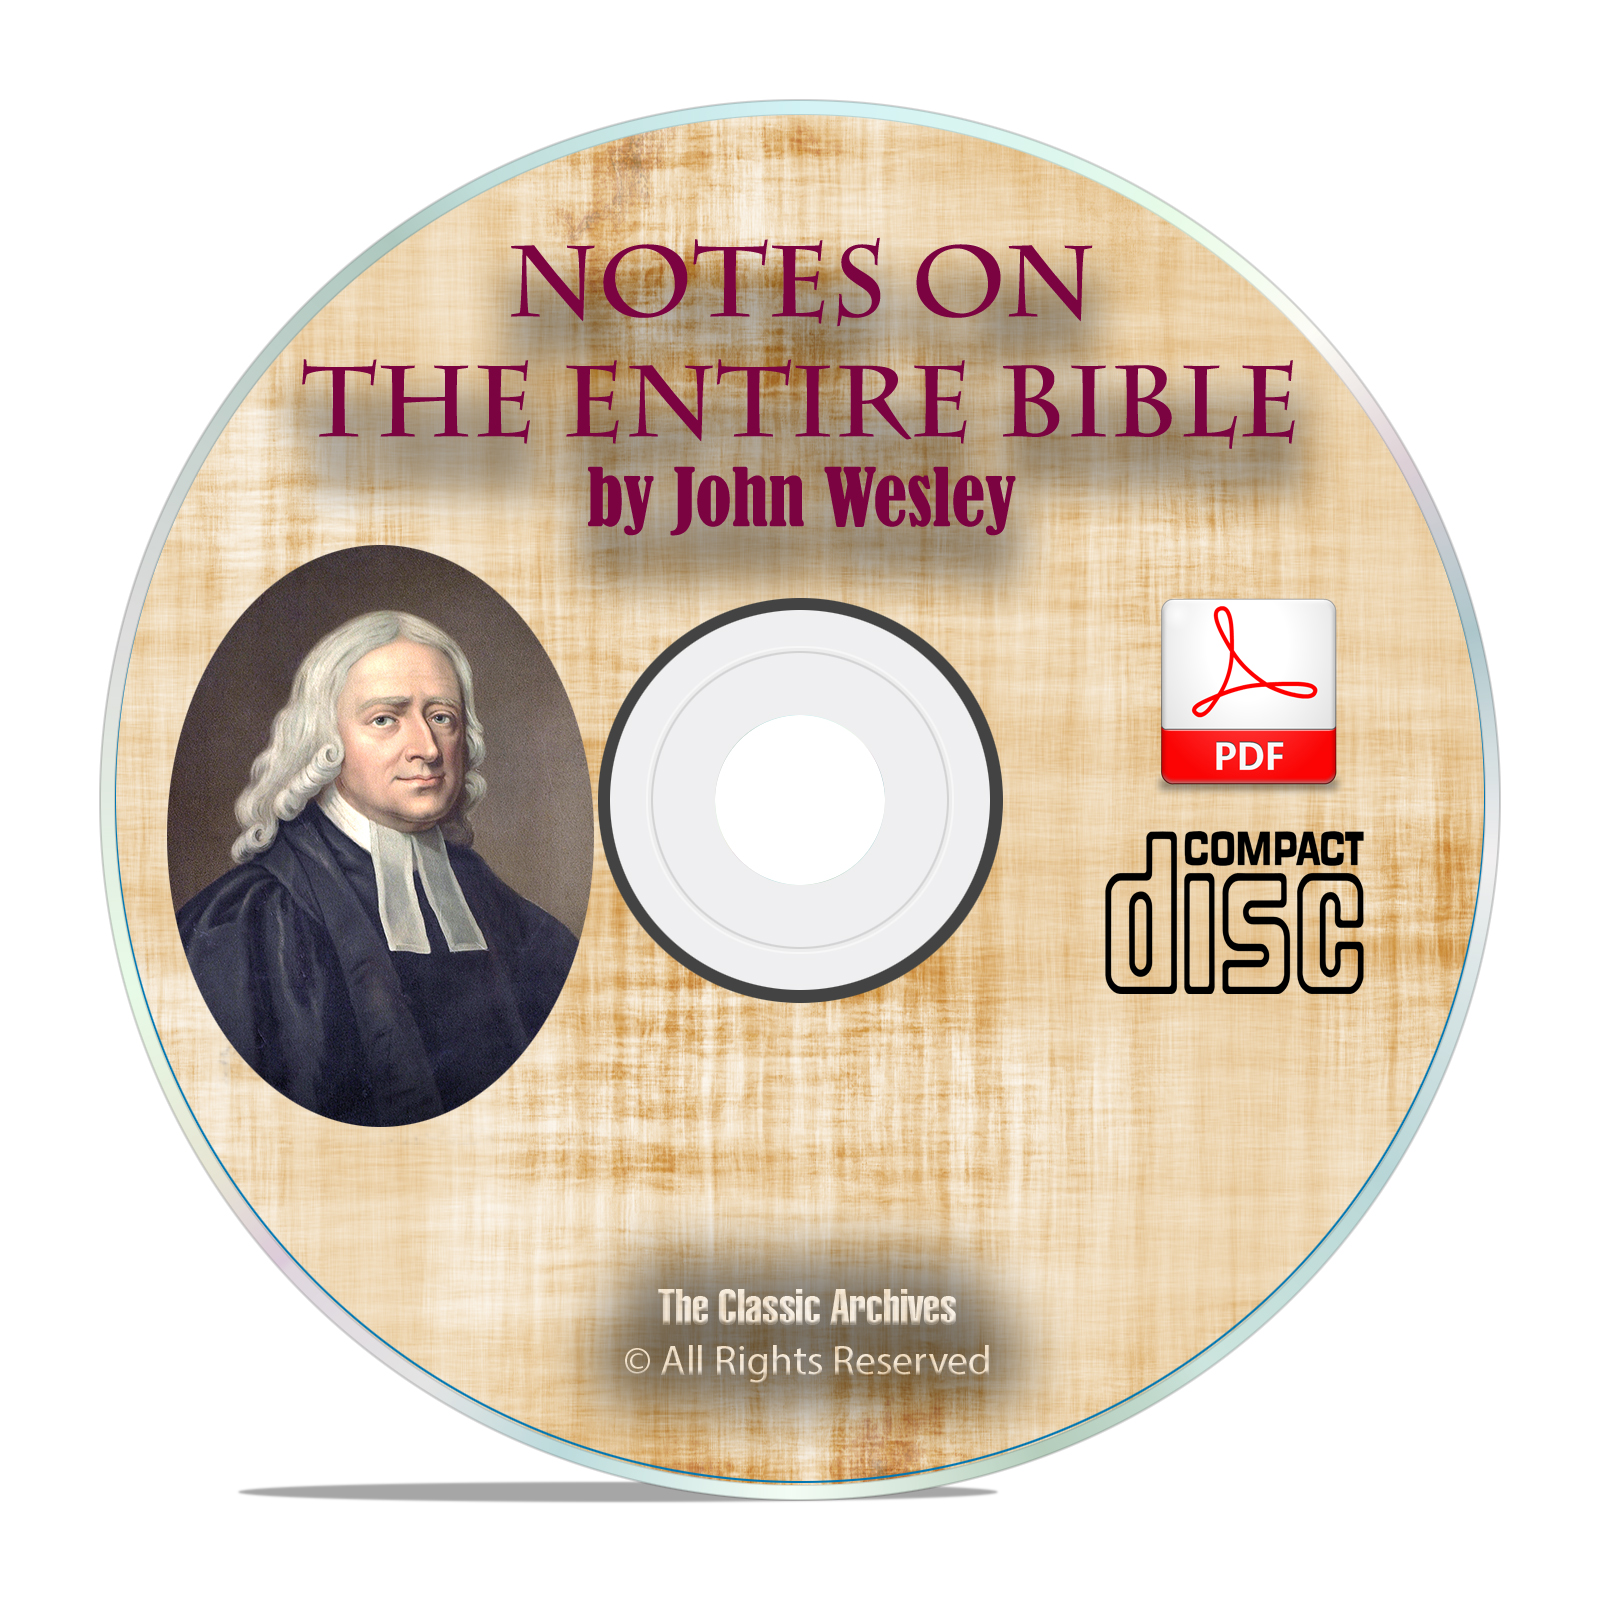 John Wesley's Notes on the Entire Bible, Scripture Commentary Study PDF CD